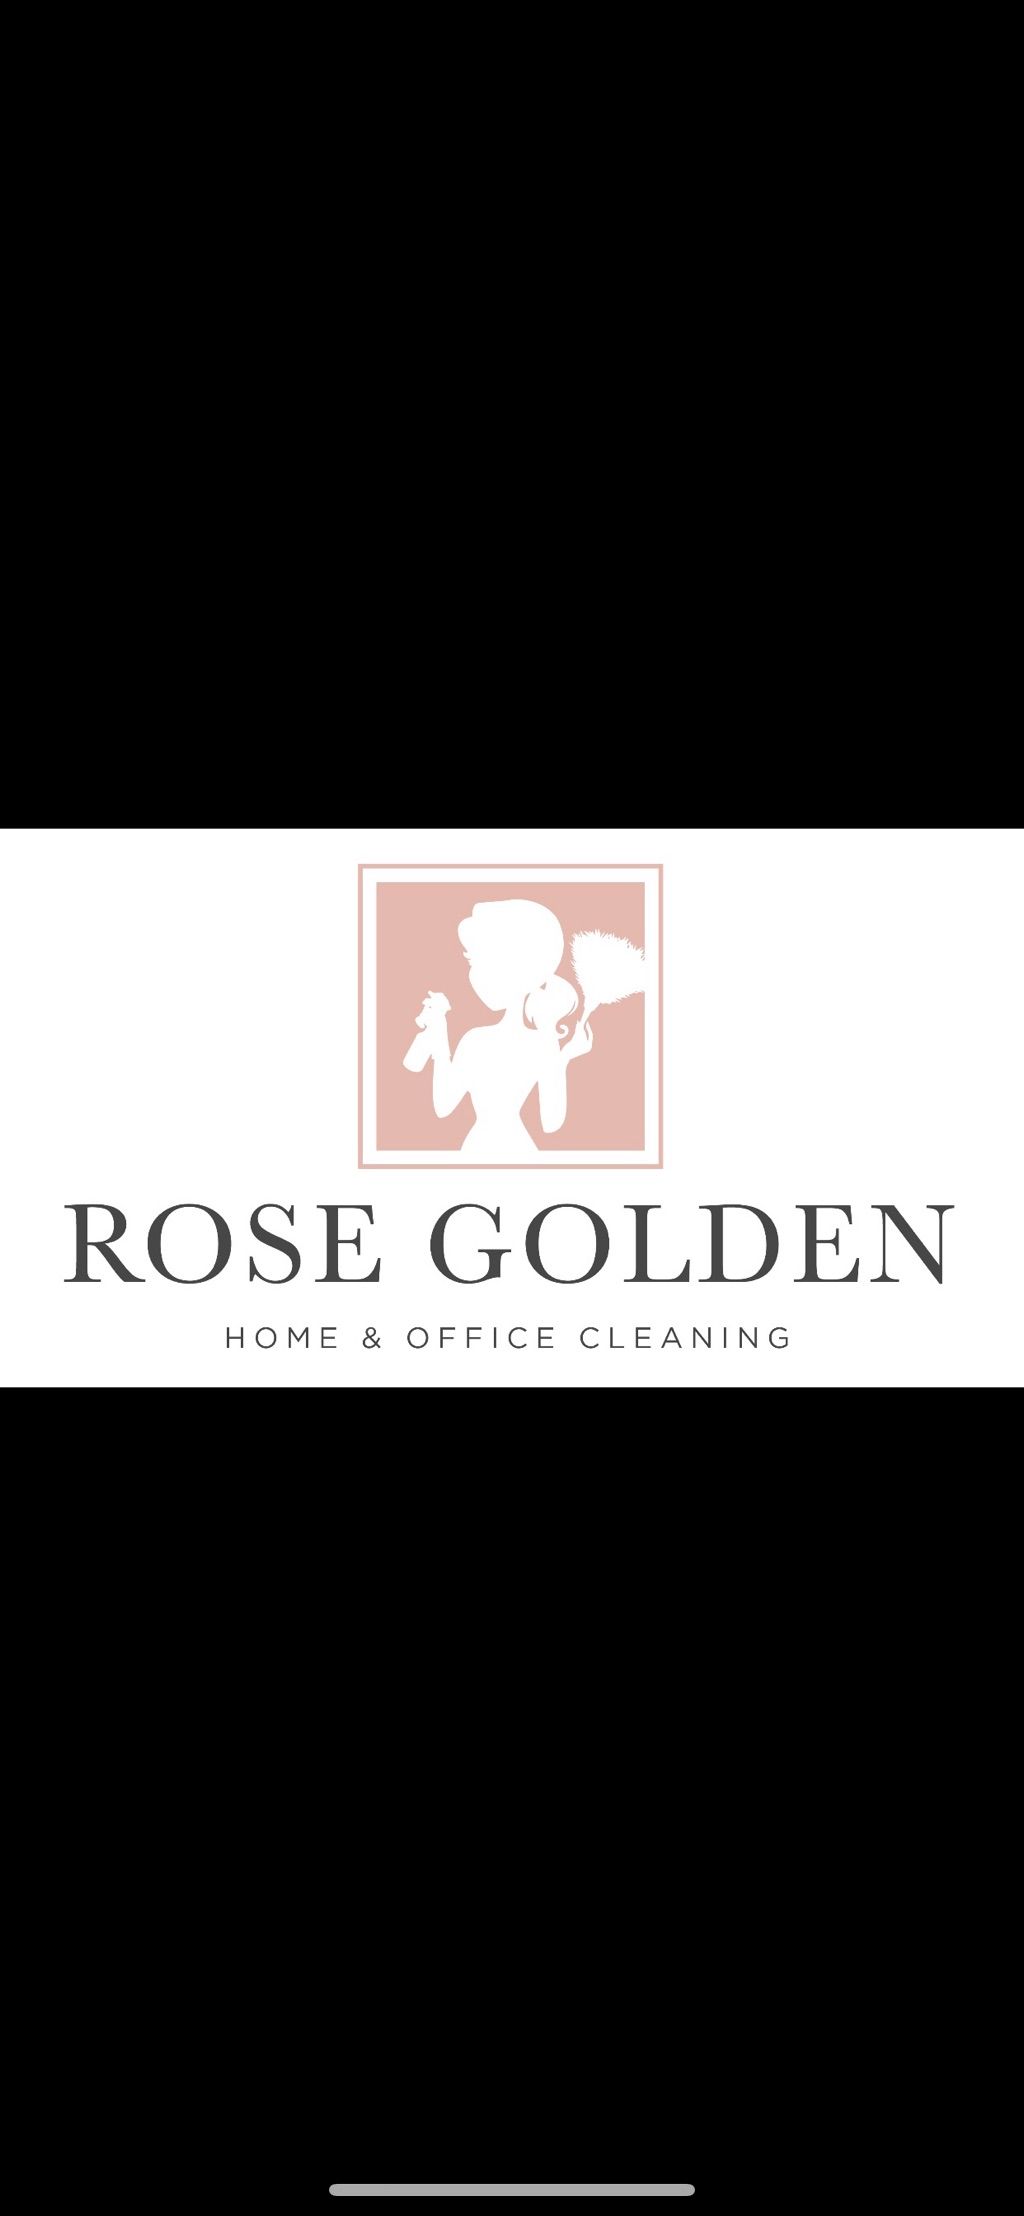 Rose Golden Home & Office Cleaning.